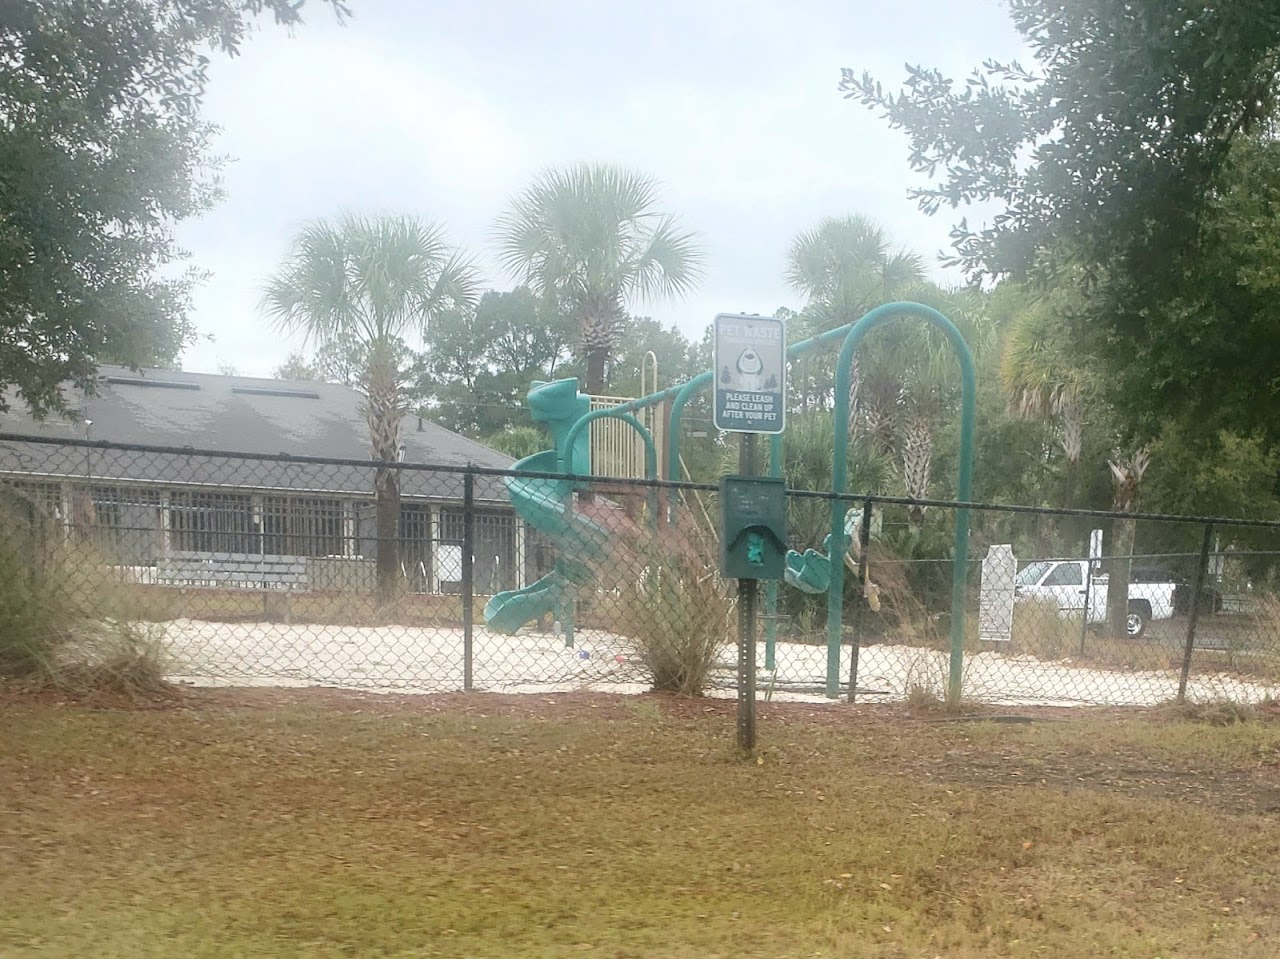 Photo of ARBOURS AT SHOEMAKER PLACE at 214 SHOEMAKER DRIVE DEFUNIAK SPRINGS, FL 32433